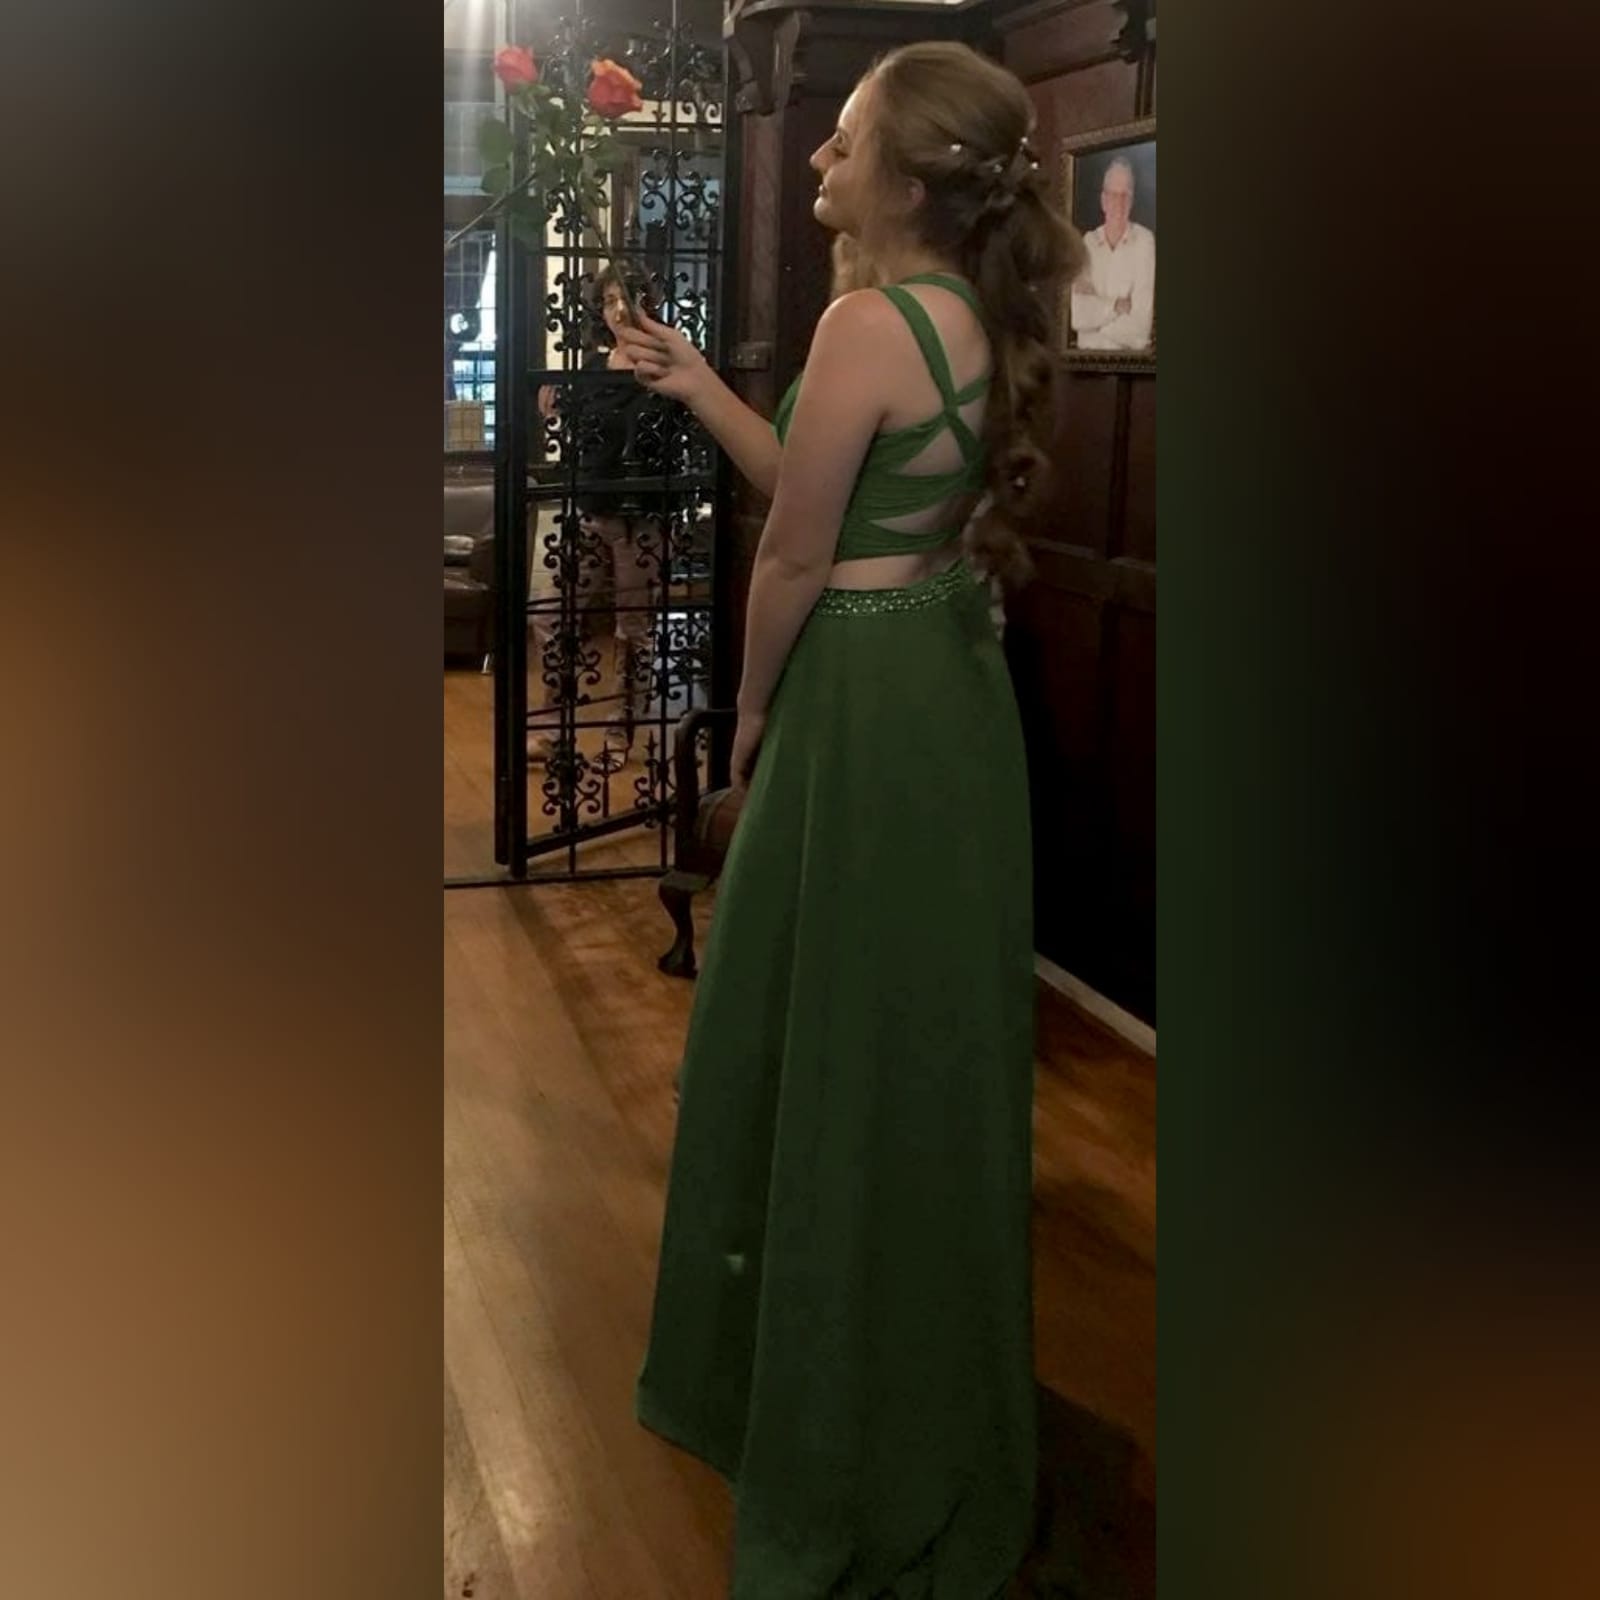 Olive green 2 piece matric dance dress 5 olive green 2 piece matric dance dress. Flowy long chiffon shirt with a little train and waistband detailed with silver beads. Pleated crop top with a rounded deep neckline , backless design with strap detail.